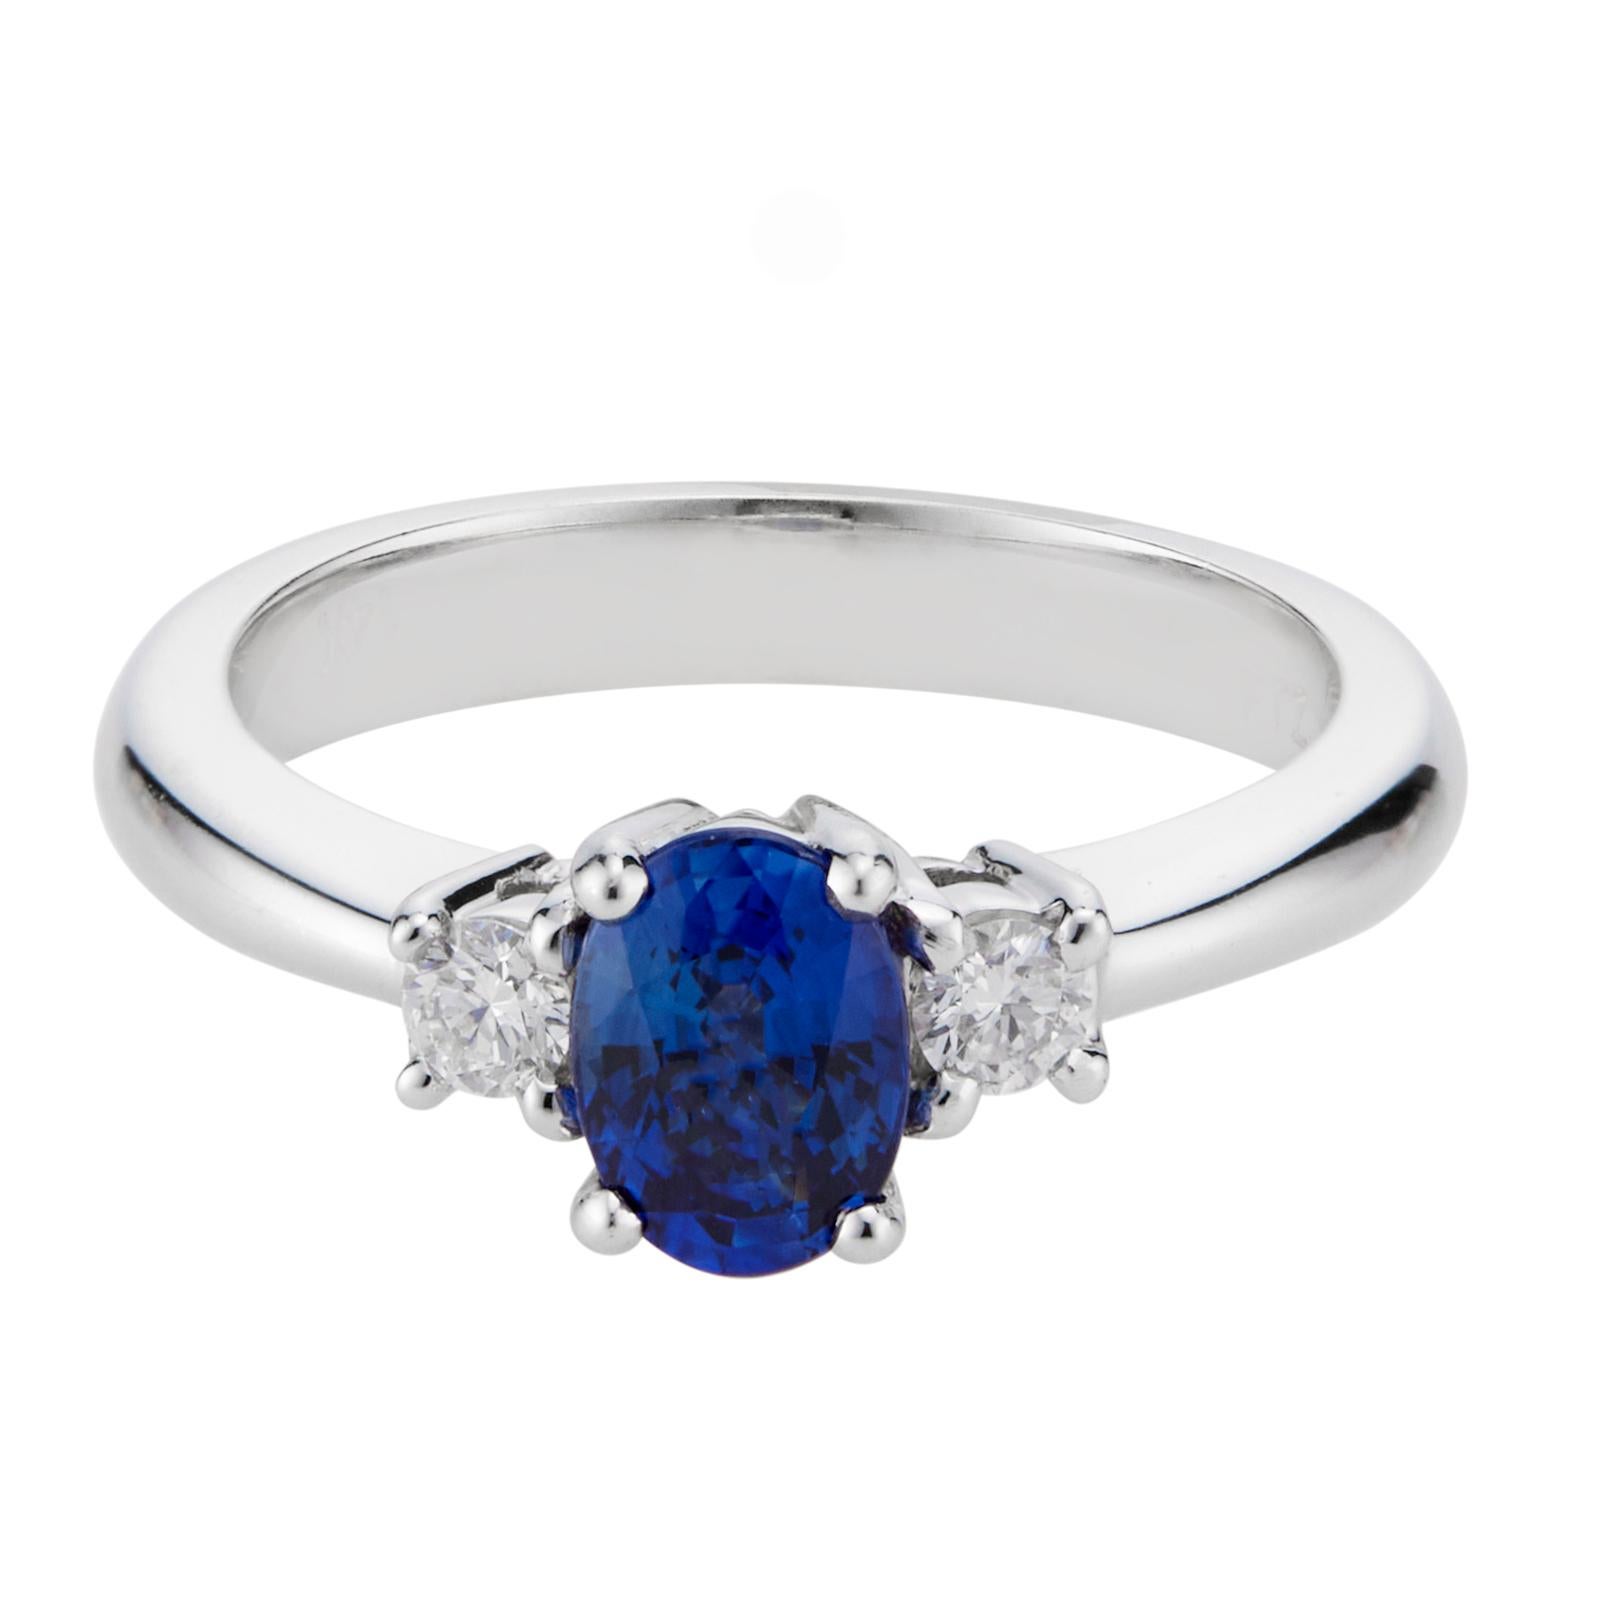 Ceylon Sapphire and diamond engagement ring. Oval sapphire center stone, simple low level heat only and no other enhancements. Set in a 14k white gold three-stone setting with 2 full cut side diamonds. 

1 oval Ceylon fine gem blue Sapphire, approx.